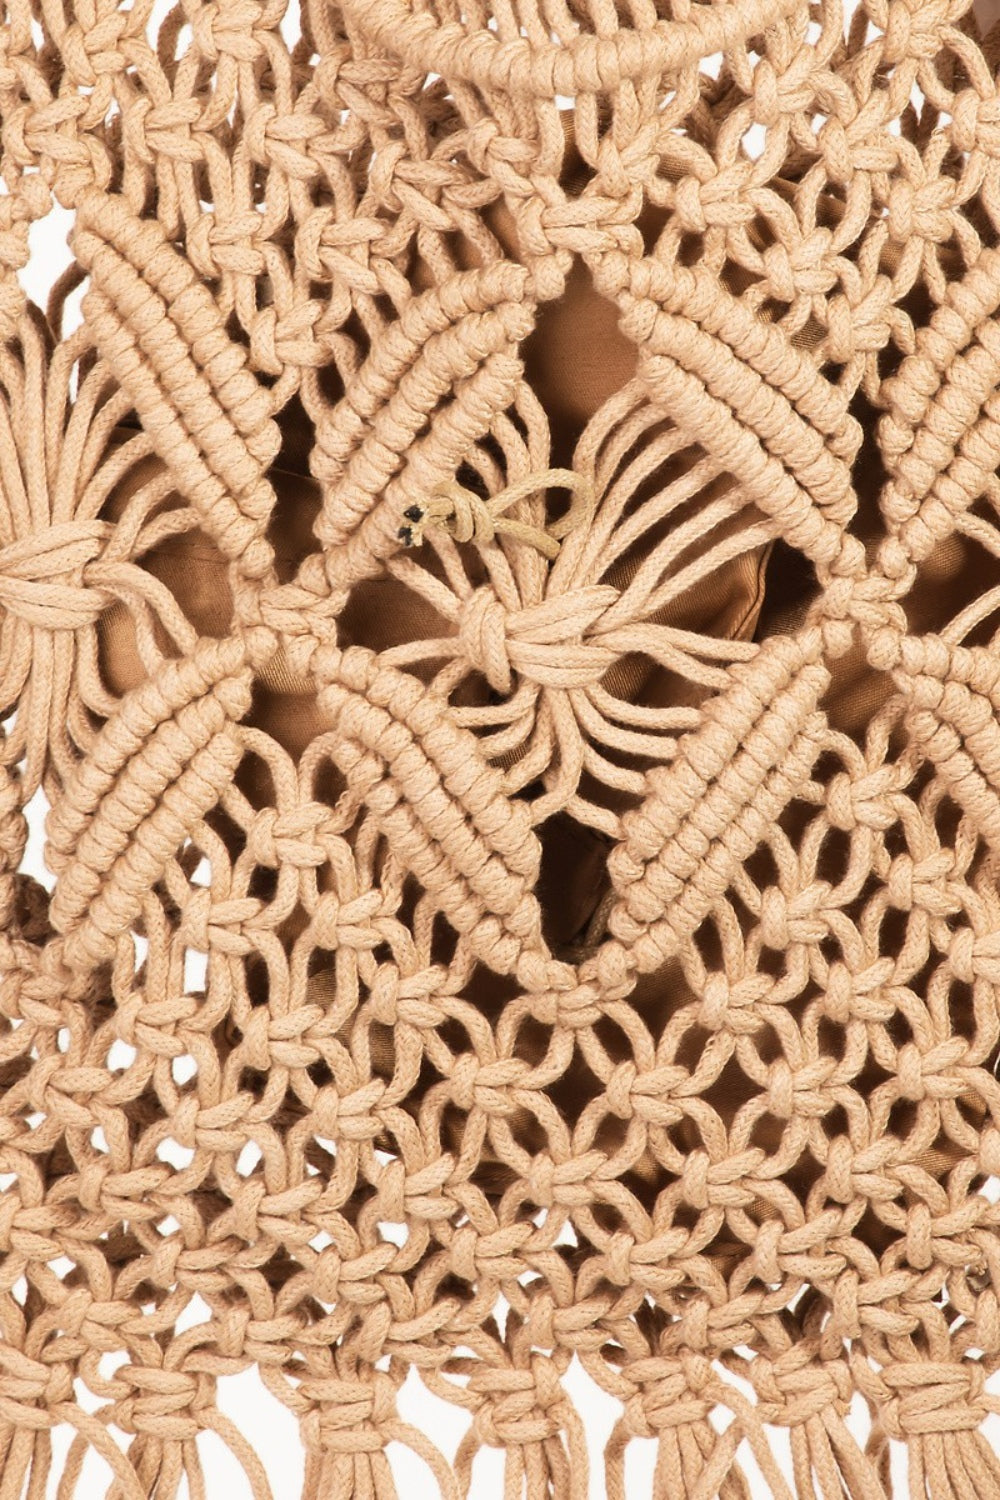 Woven Handbag with Tassel is a chic and stylish accessory that exudes a bohemian vibe with its woven design and playful tassel accent. The handbag features intricate weaving techniques that create a unique and eye-catching texture.